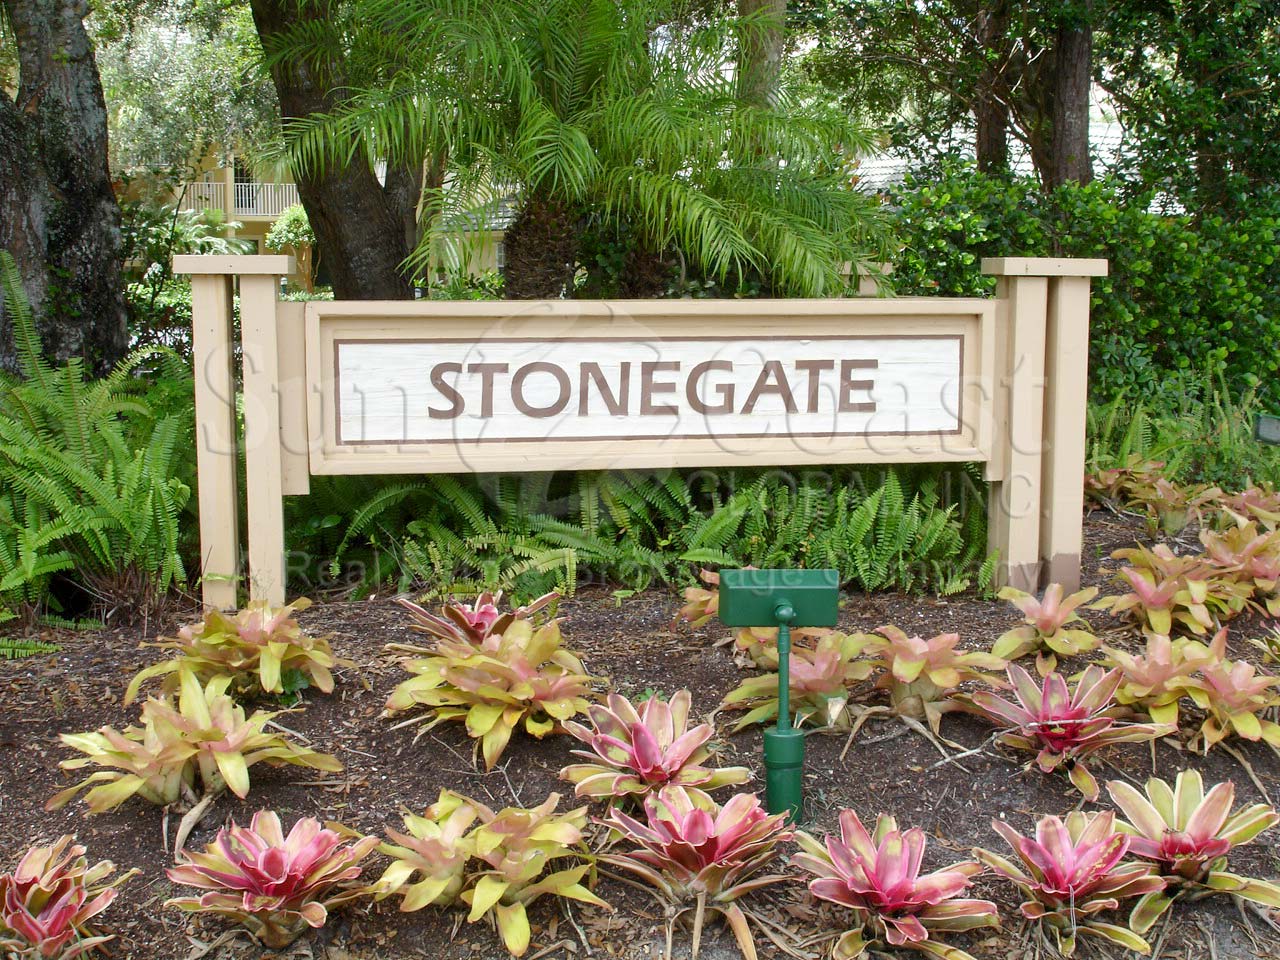 Stonegate sign